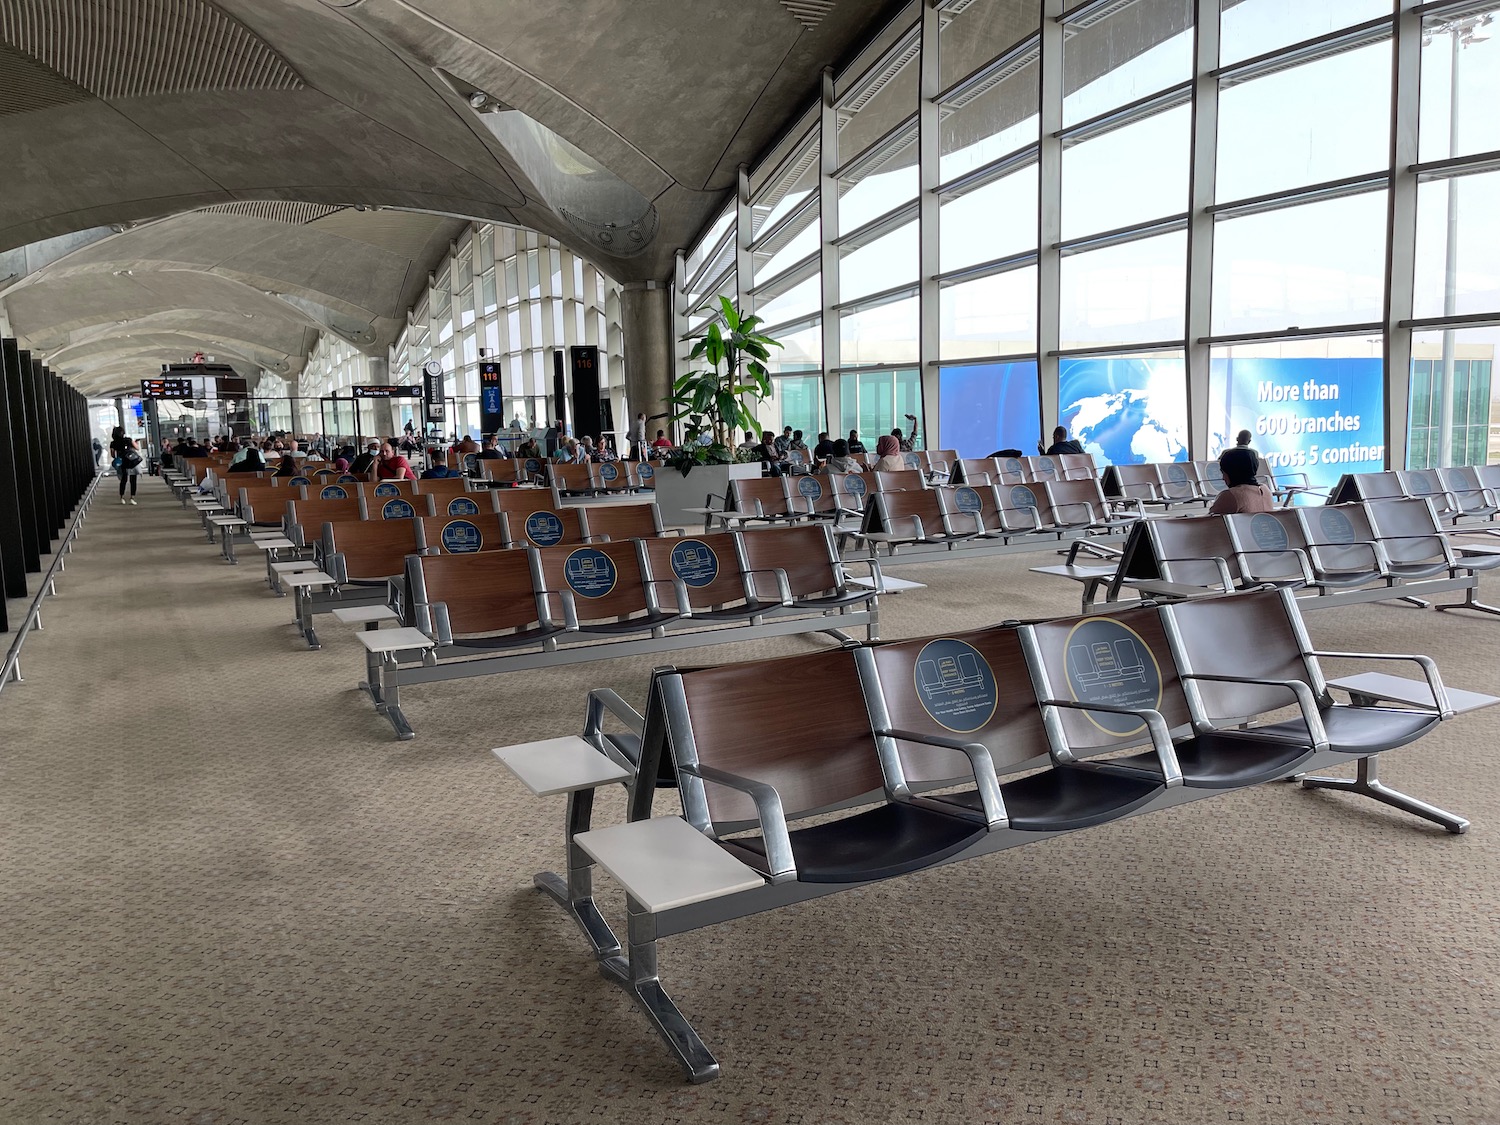 rows of chairs in an airport terminal